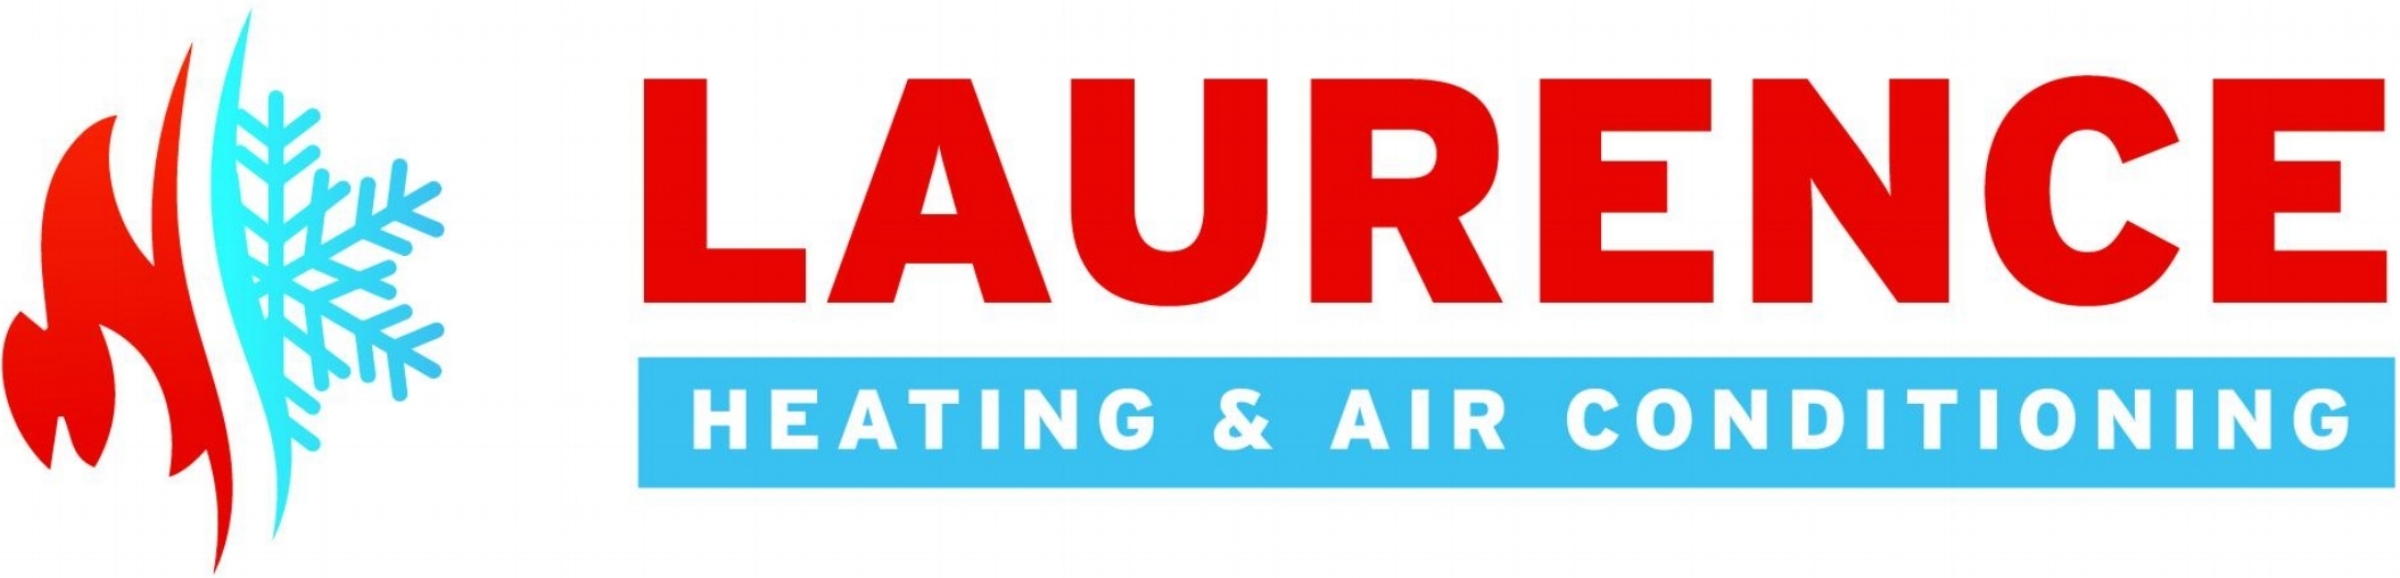 Laurence Heating and Air Conditioning